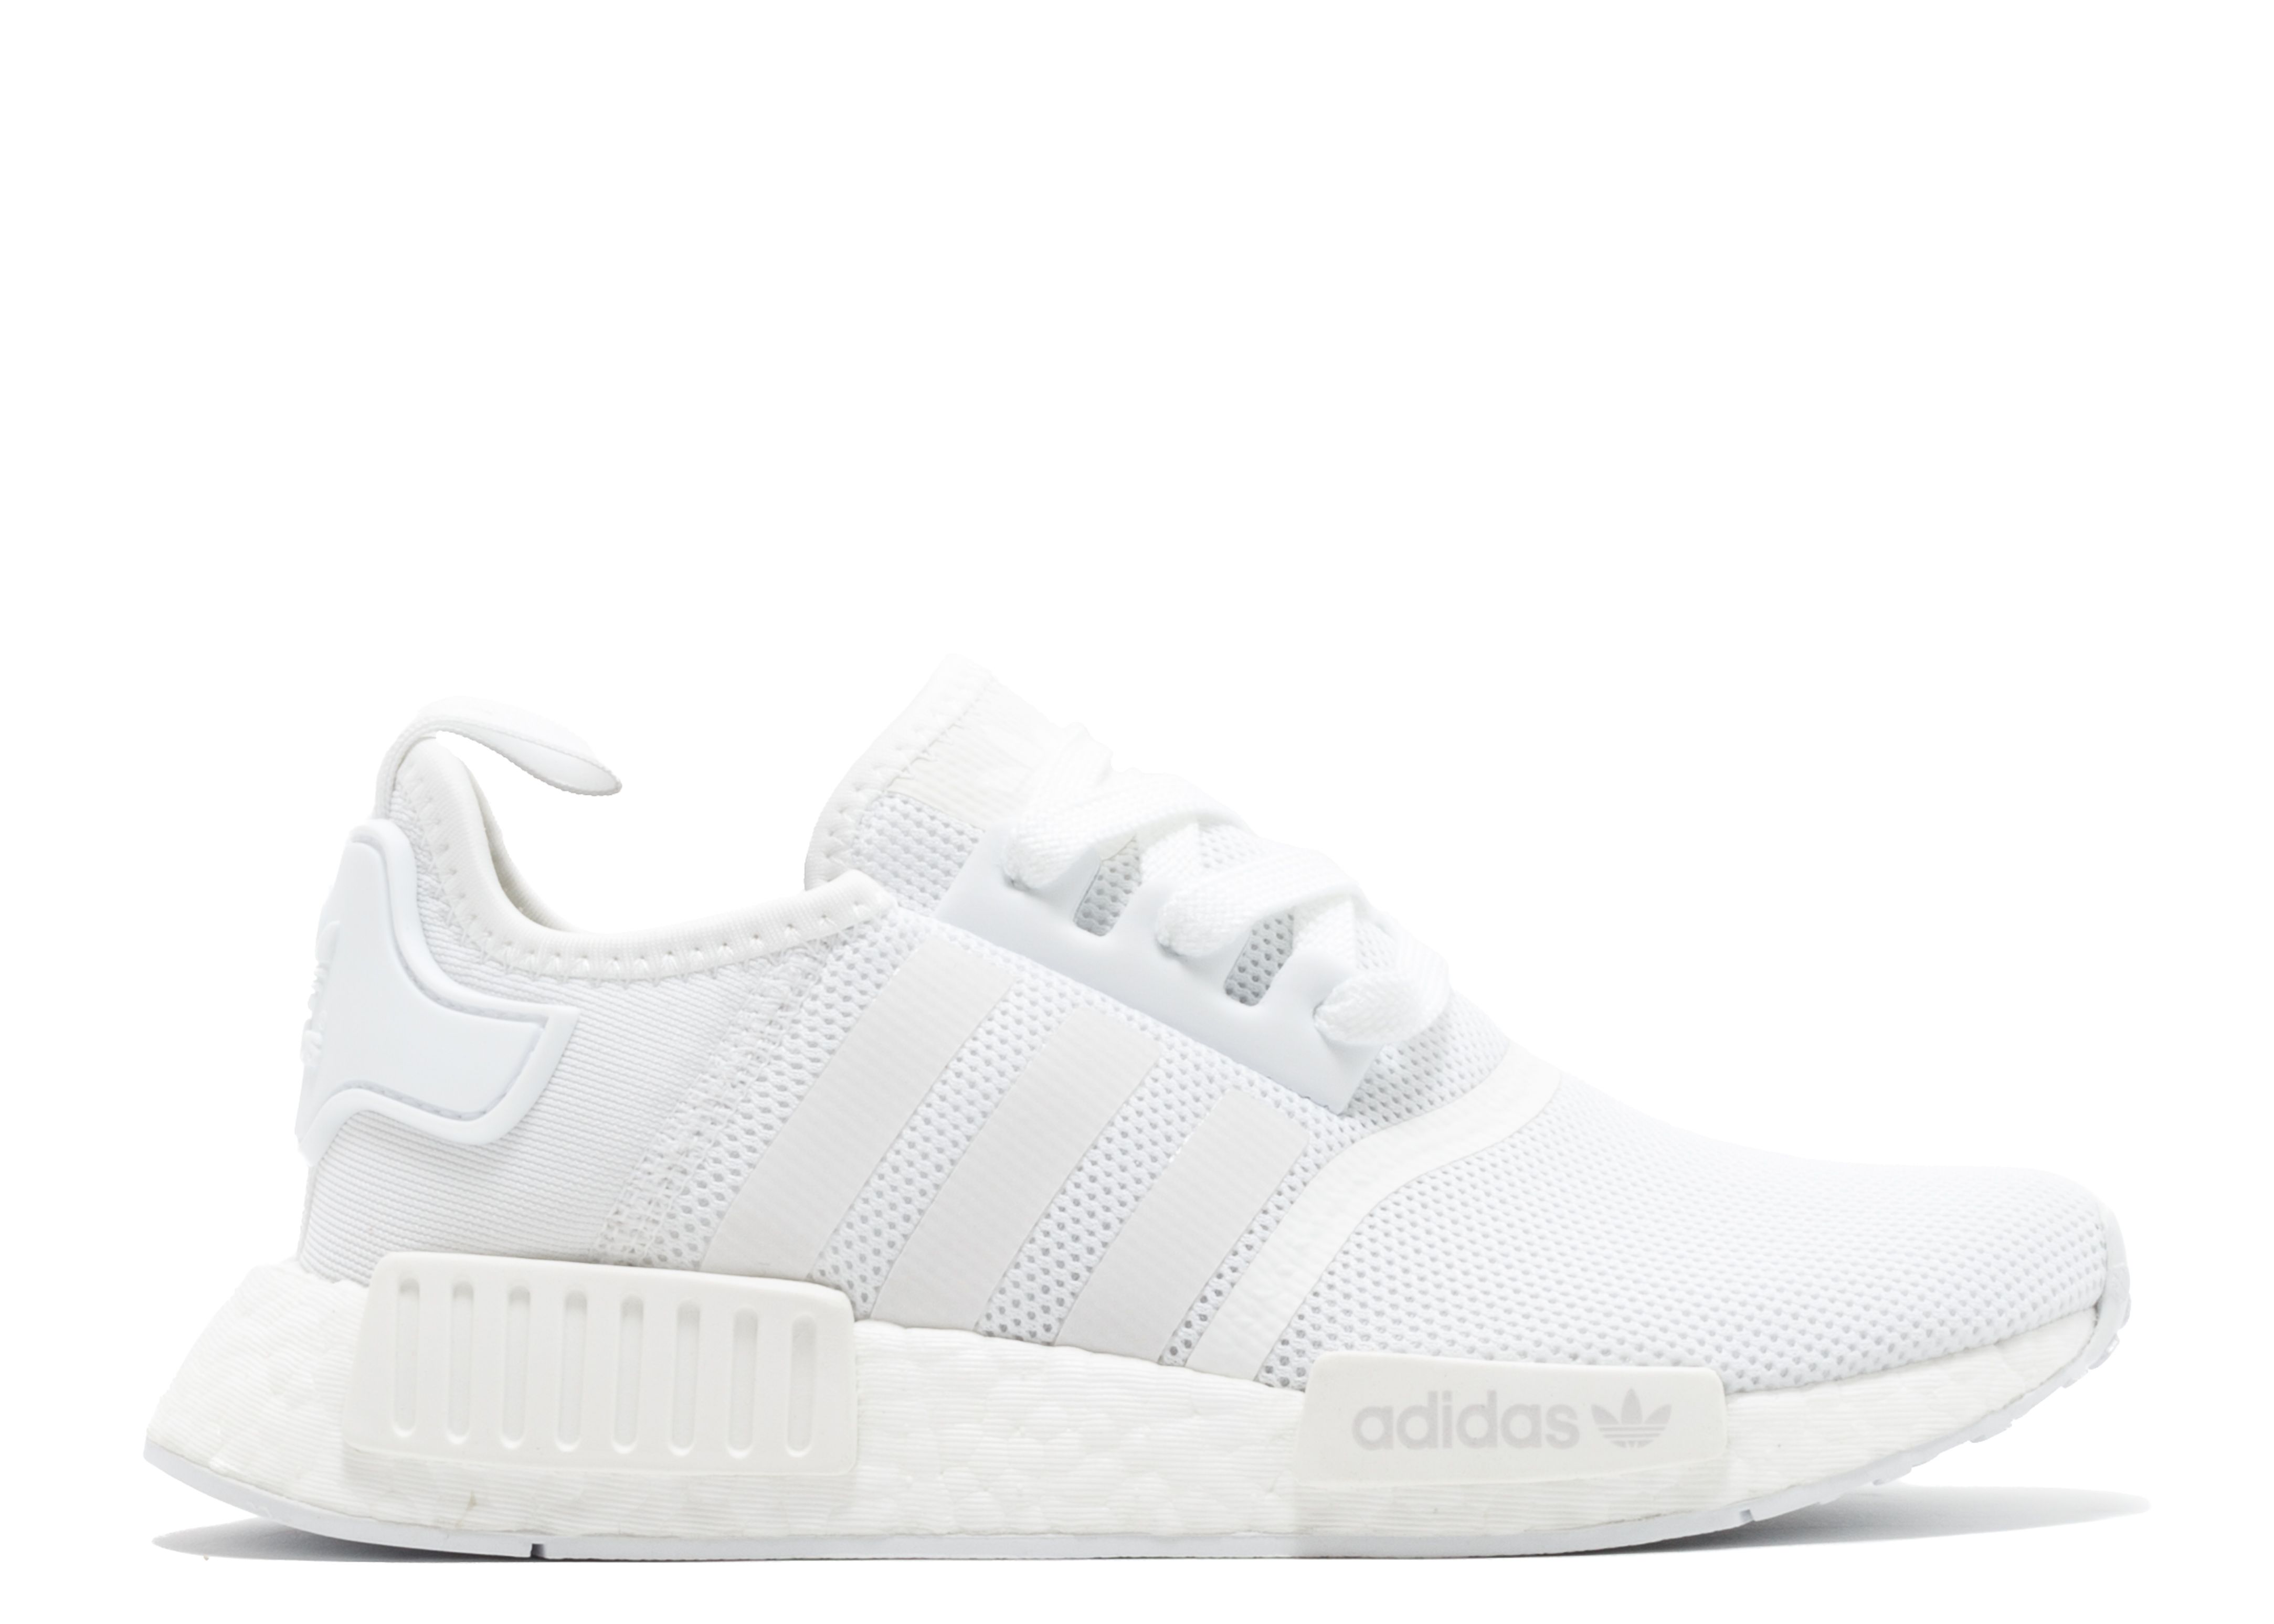 adidas nmd r1 roller knit - femme chaussures